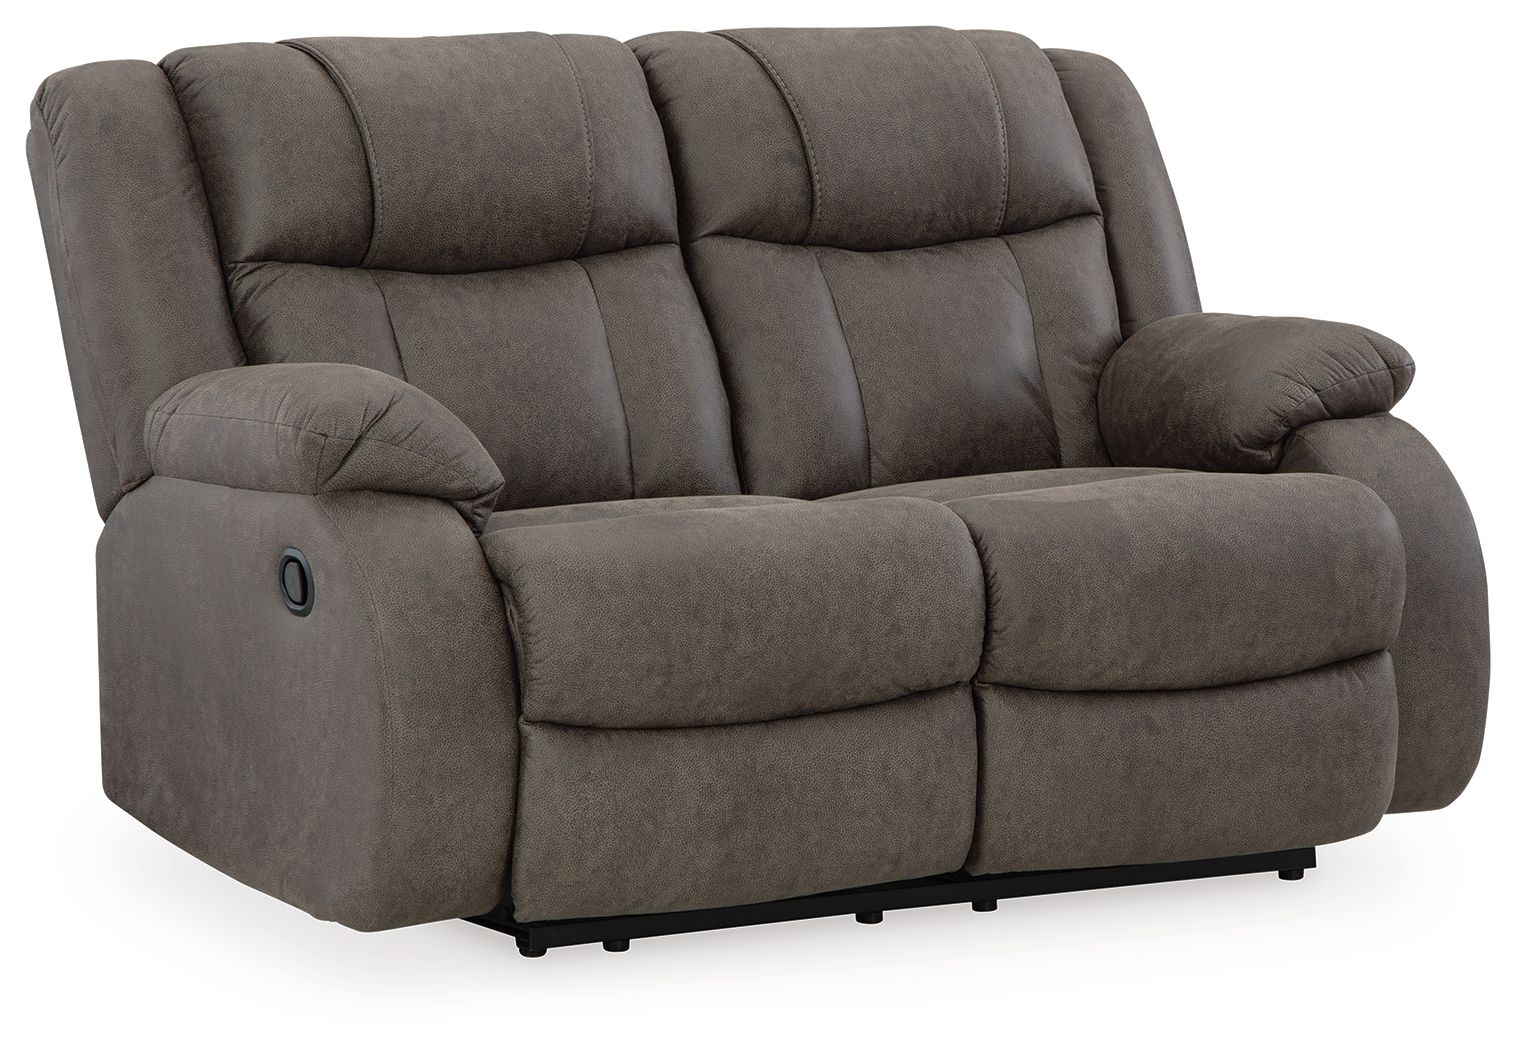 First Base - Gunmetal - Reclining Loveseat - Faux Leather